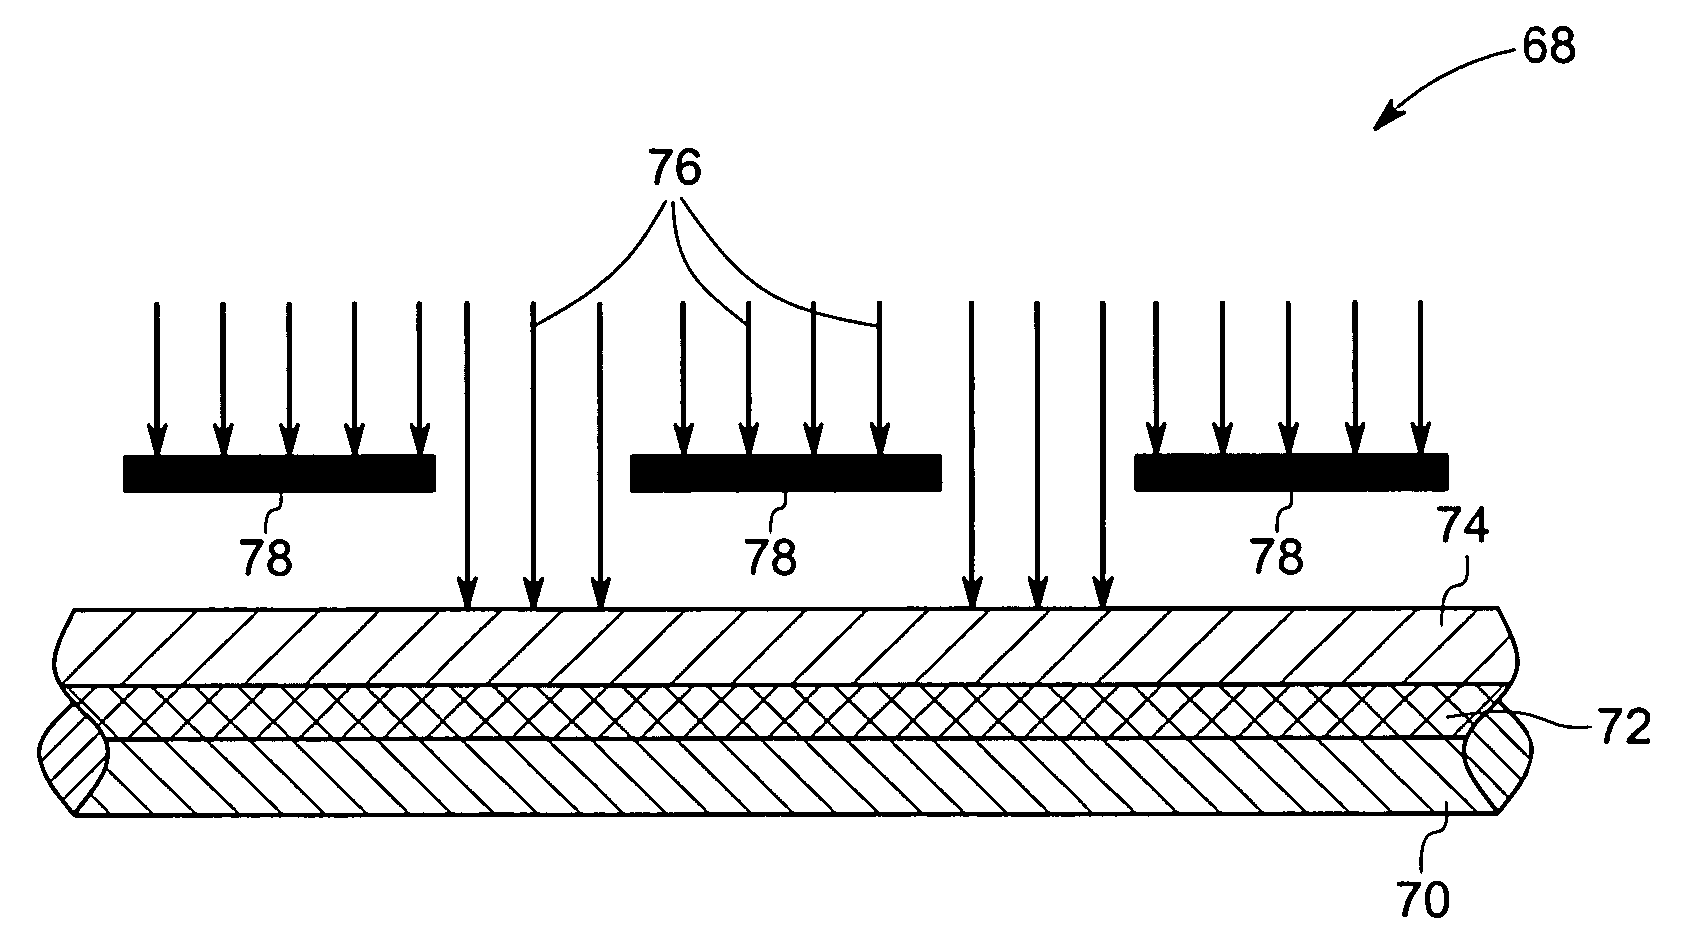 Self-forming polymer waveguide and waveguide material with reduced shrinkage